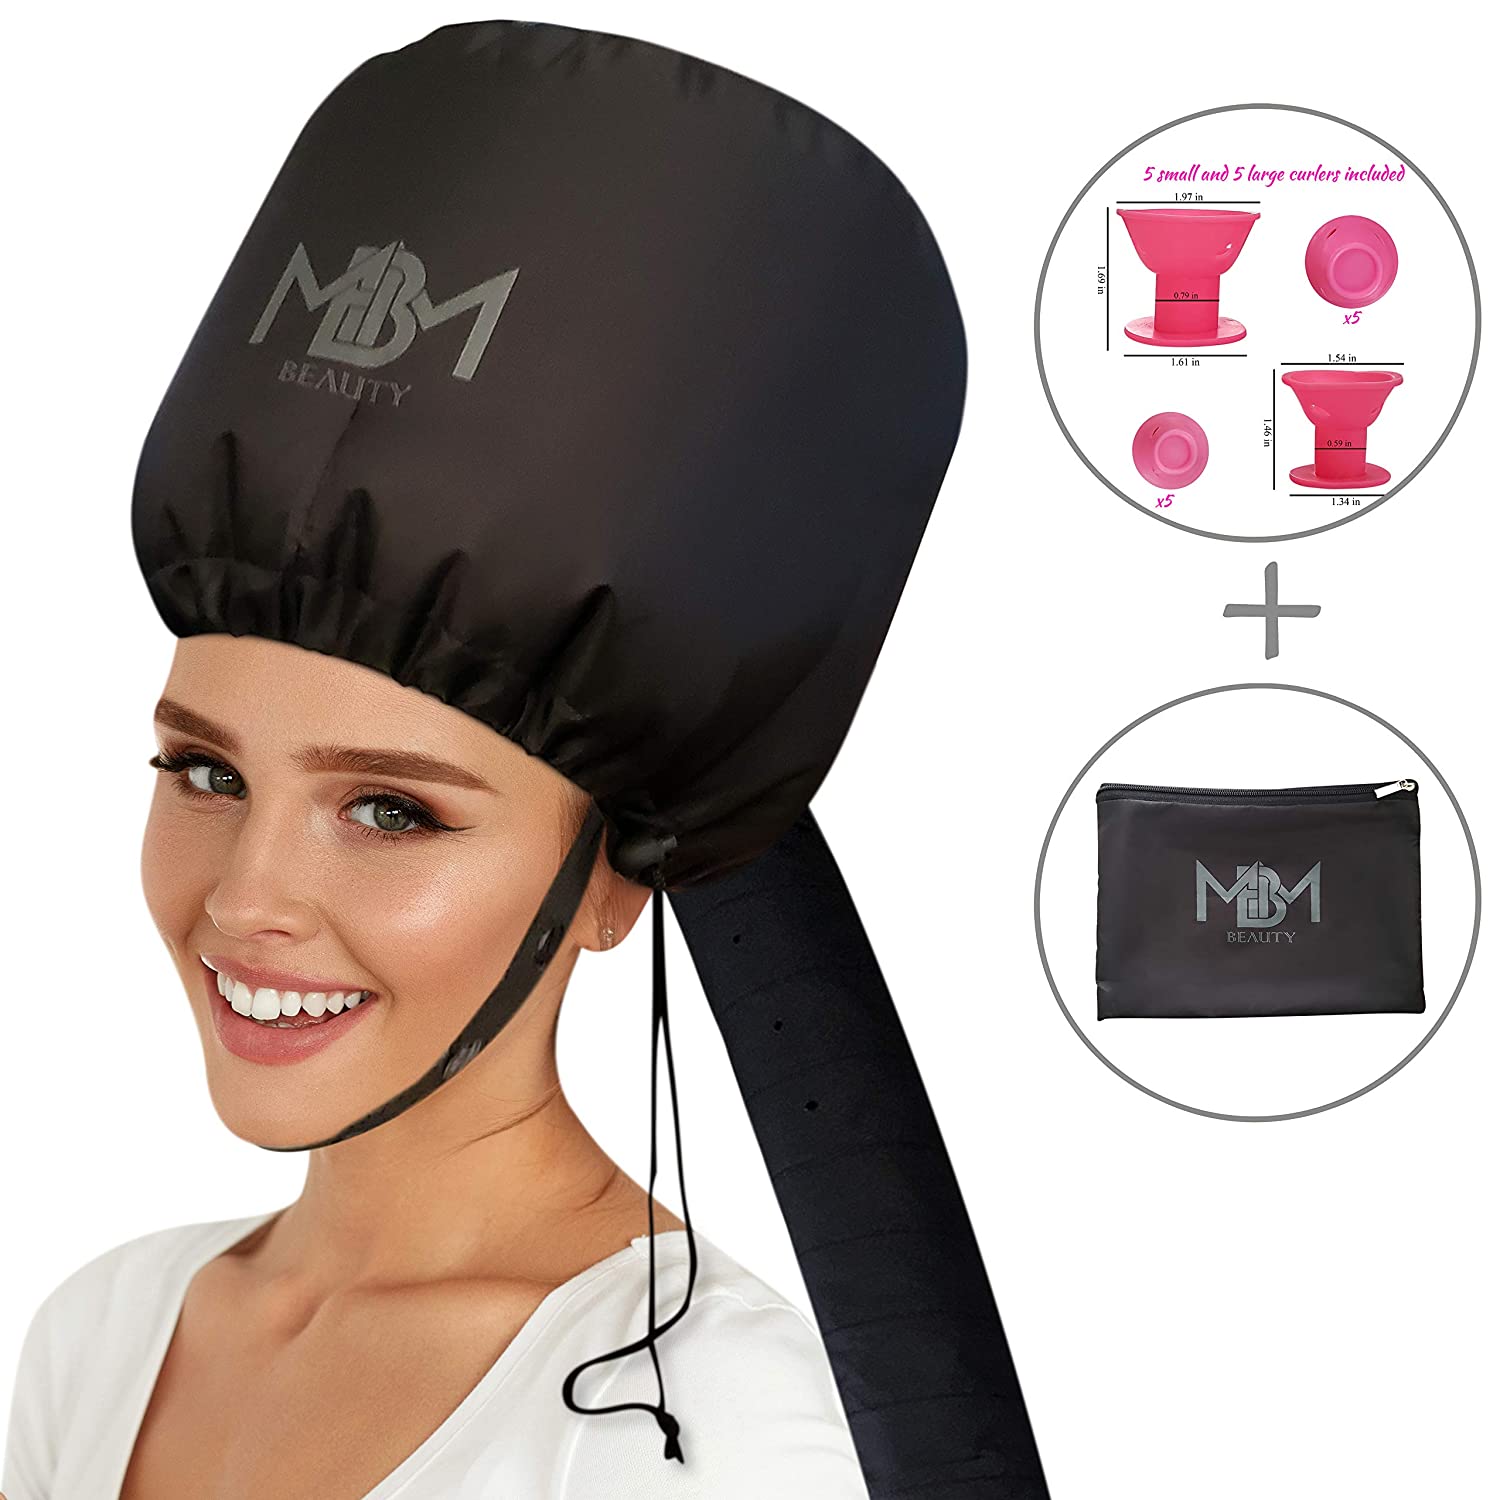 Looking for Fun Way to Dry Your Hair? Here are Amazon's Top 5 Best Portable Hair Dryers